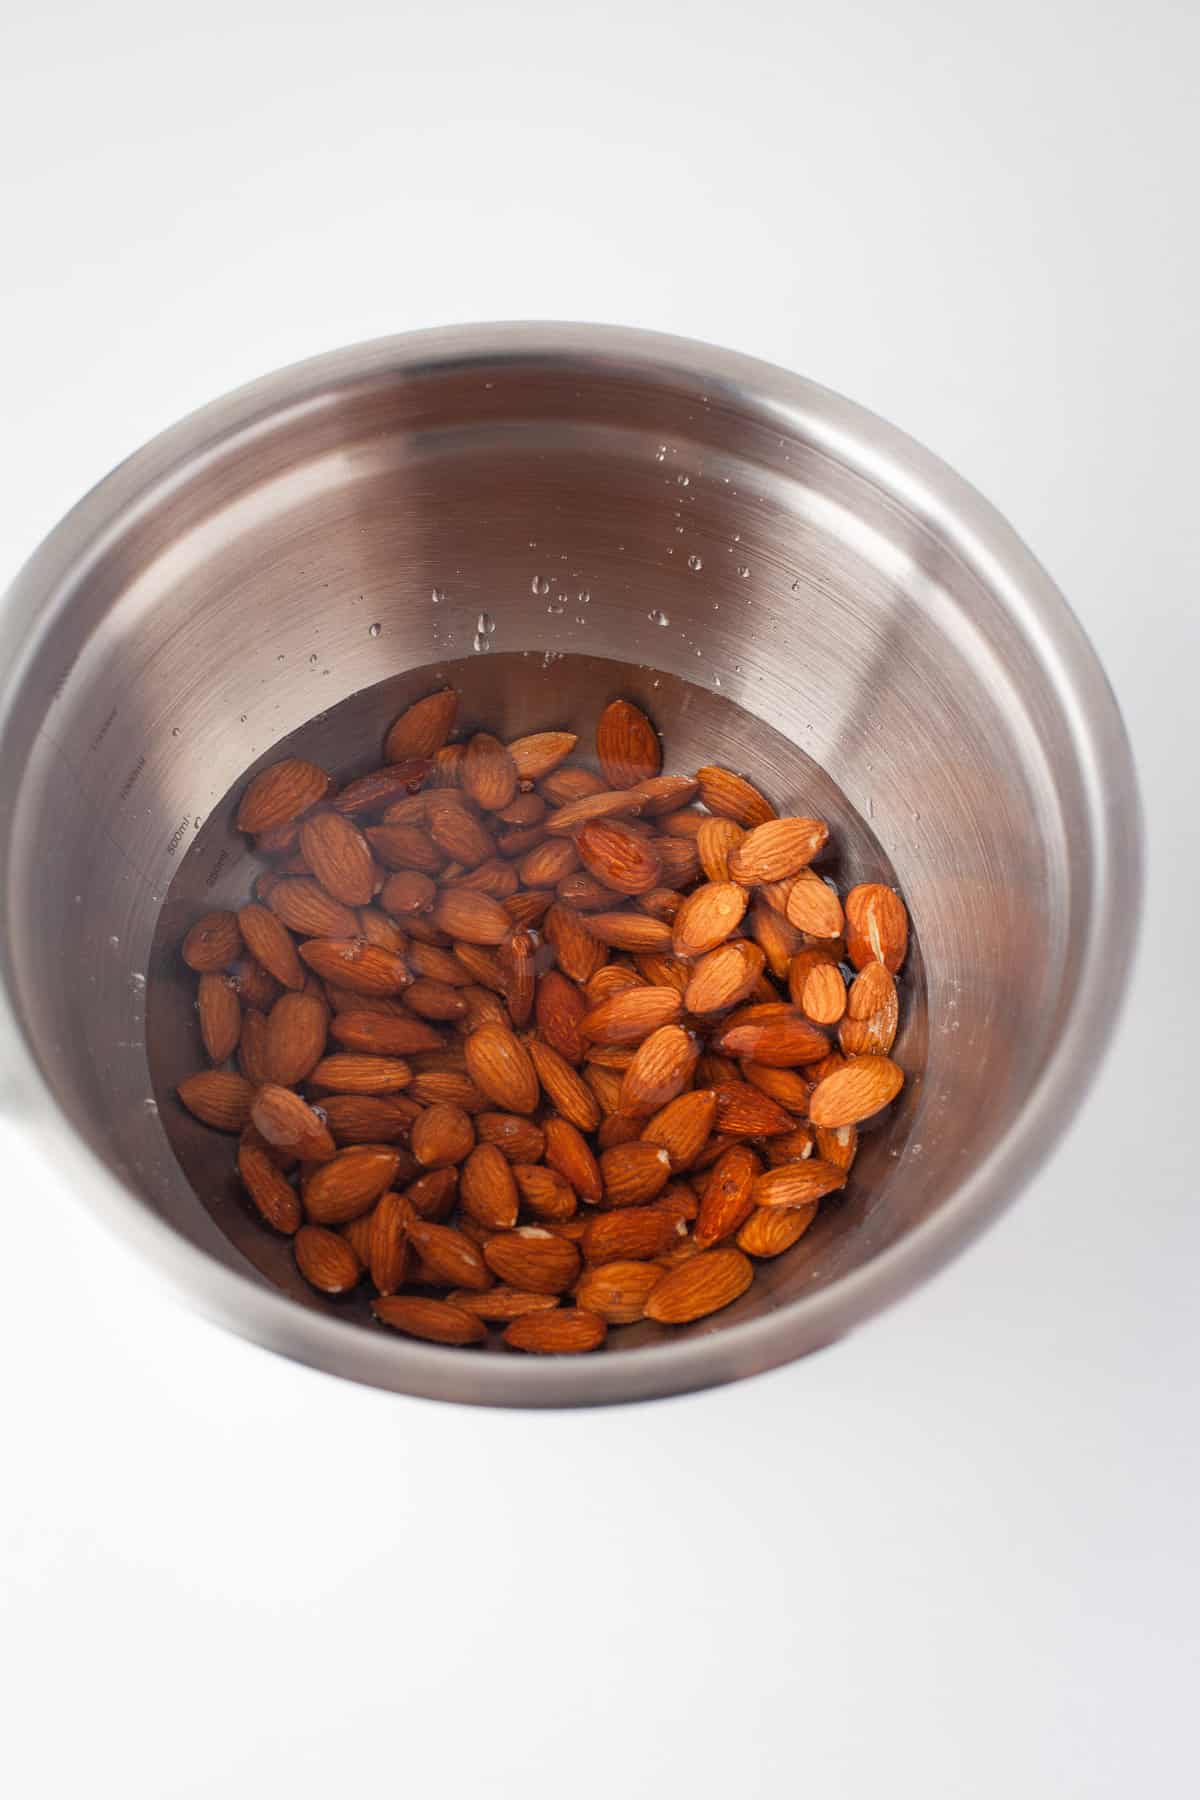 Almonds being soaked in water.